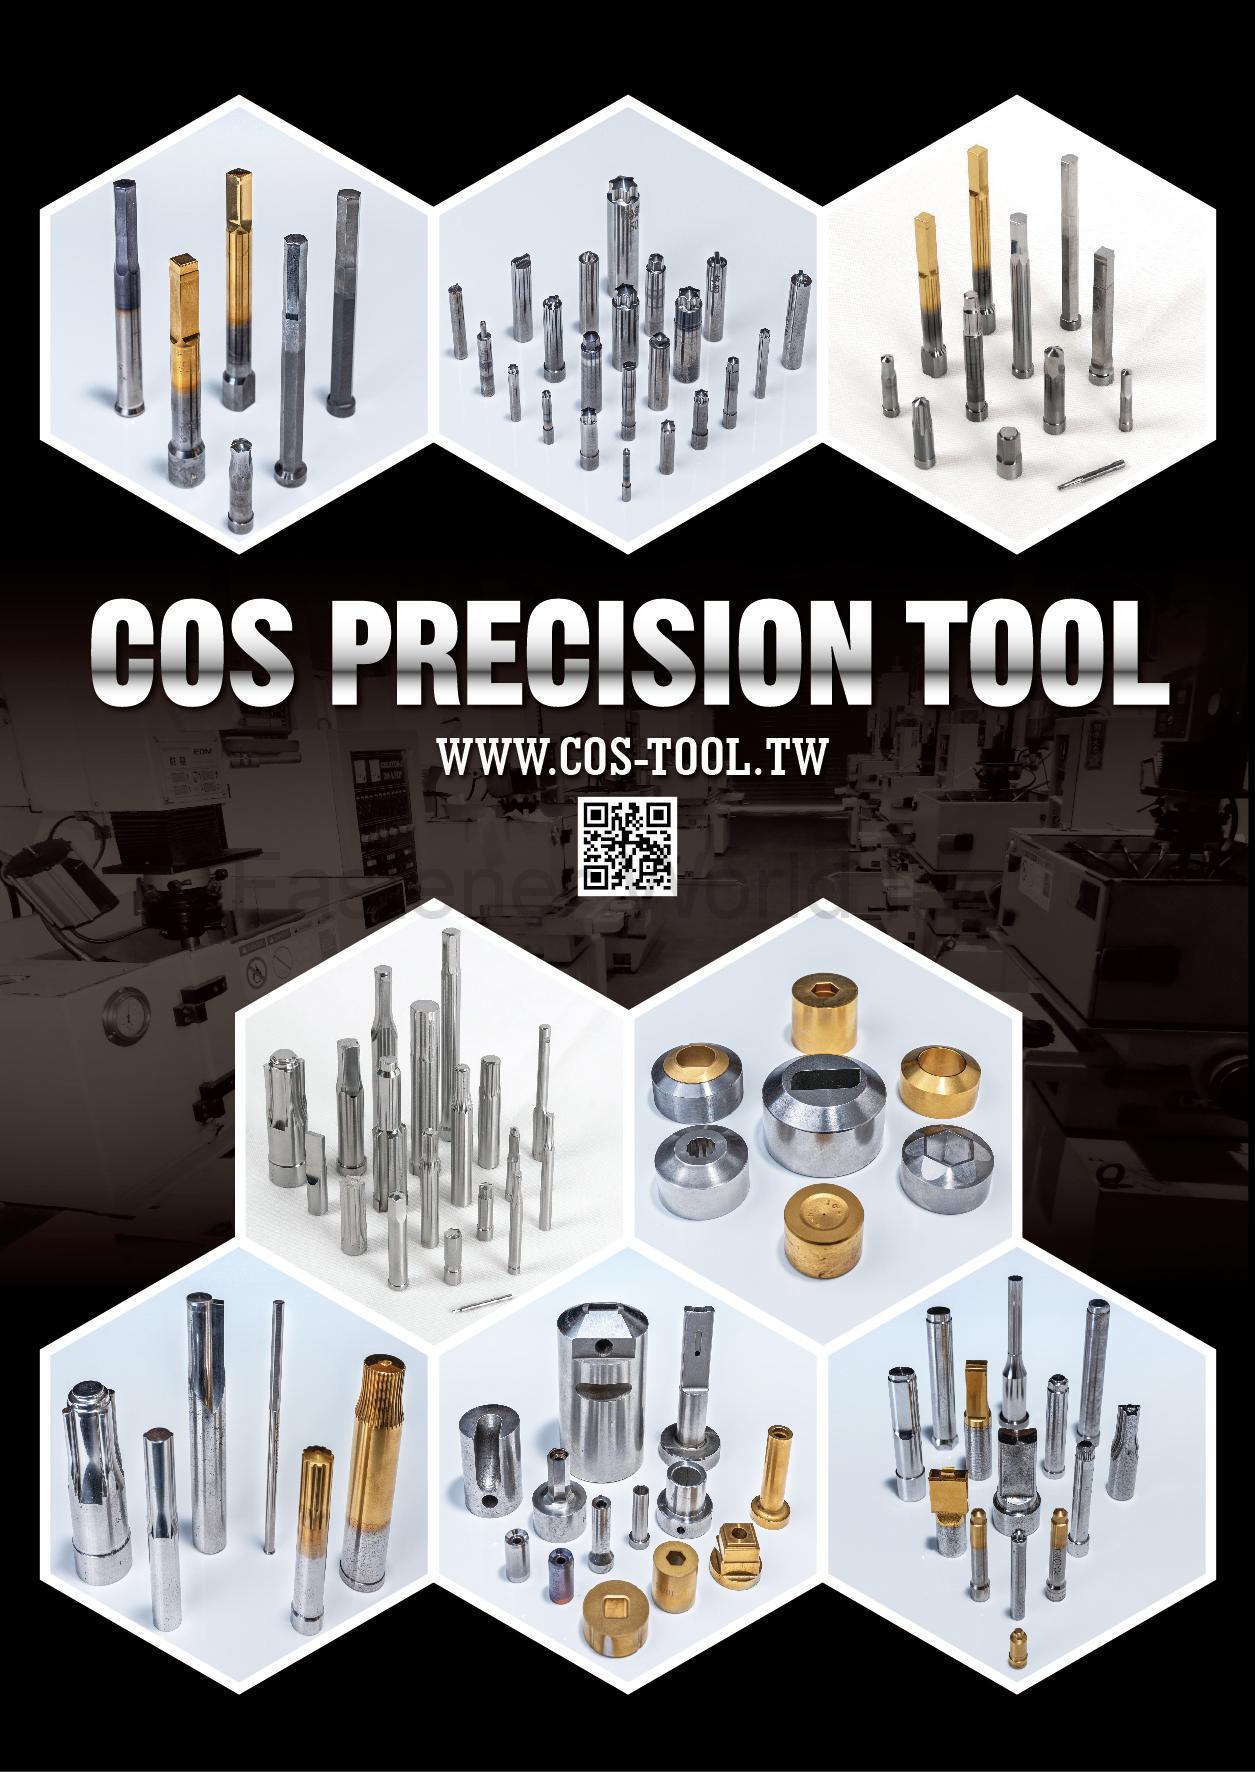 COS PRECISION TOOL CO., LTD. , Customerized Punches, Carbide Punches, CNC Turning Parts, Carbide Dies, Header Punches, Dies and Punches, Cuttging Dies, Serration Dies, Die Set... , Turning Parts